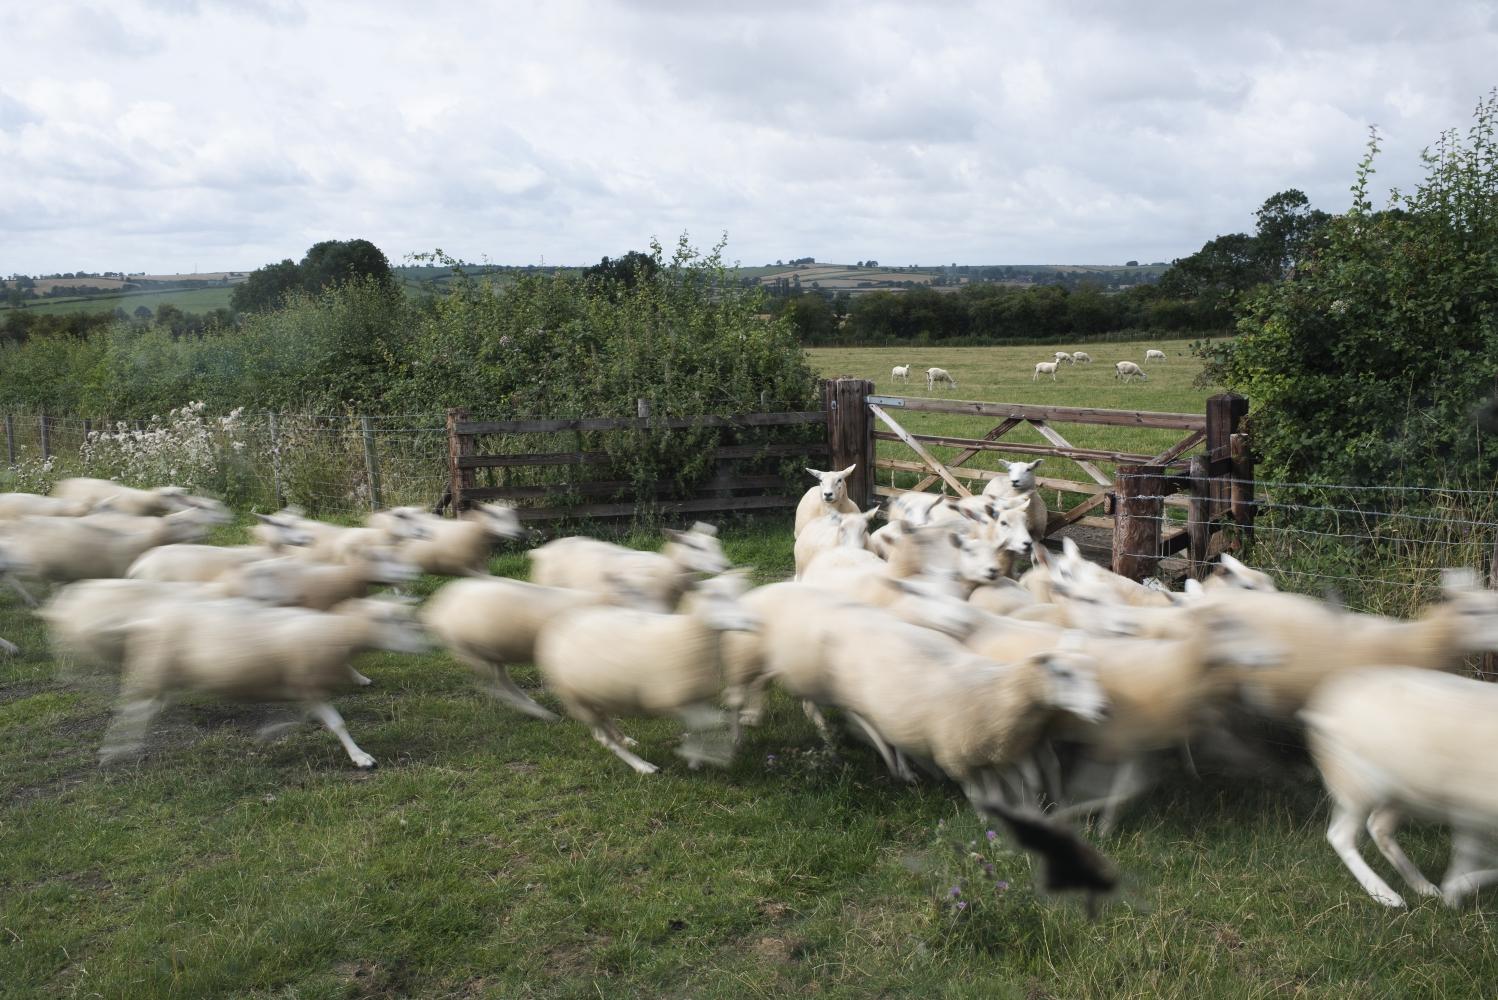 A flock of sheep running in a field